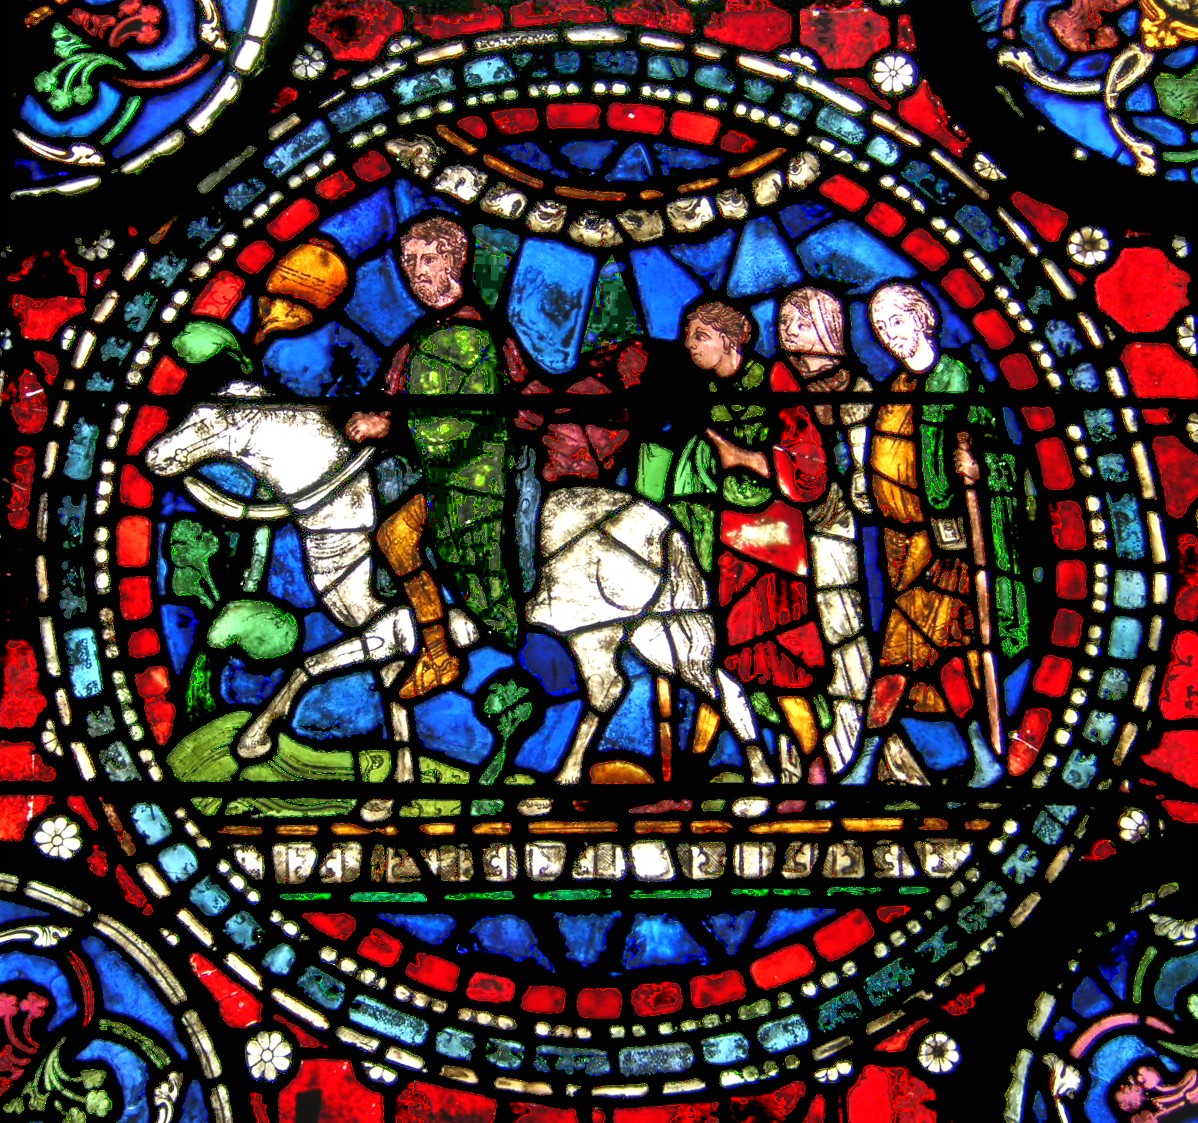 Medieval stained glass - Wikipedia